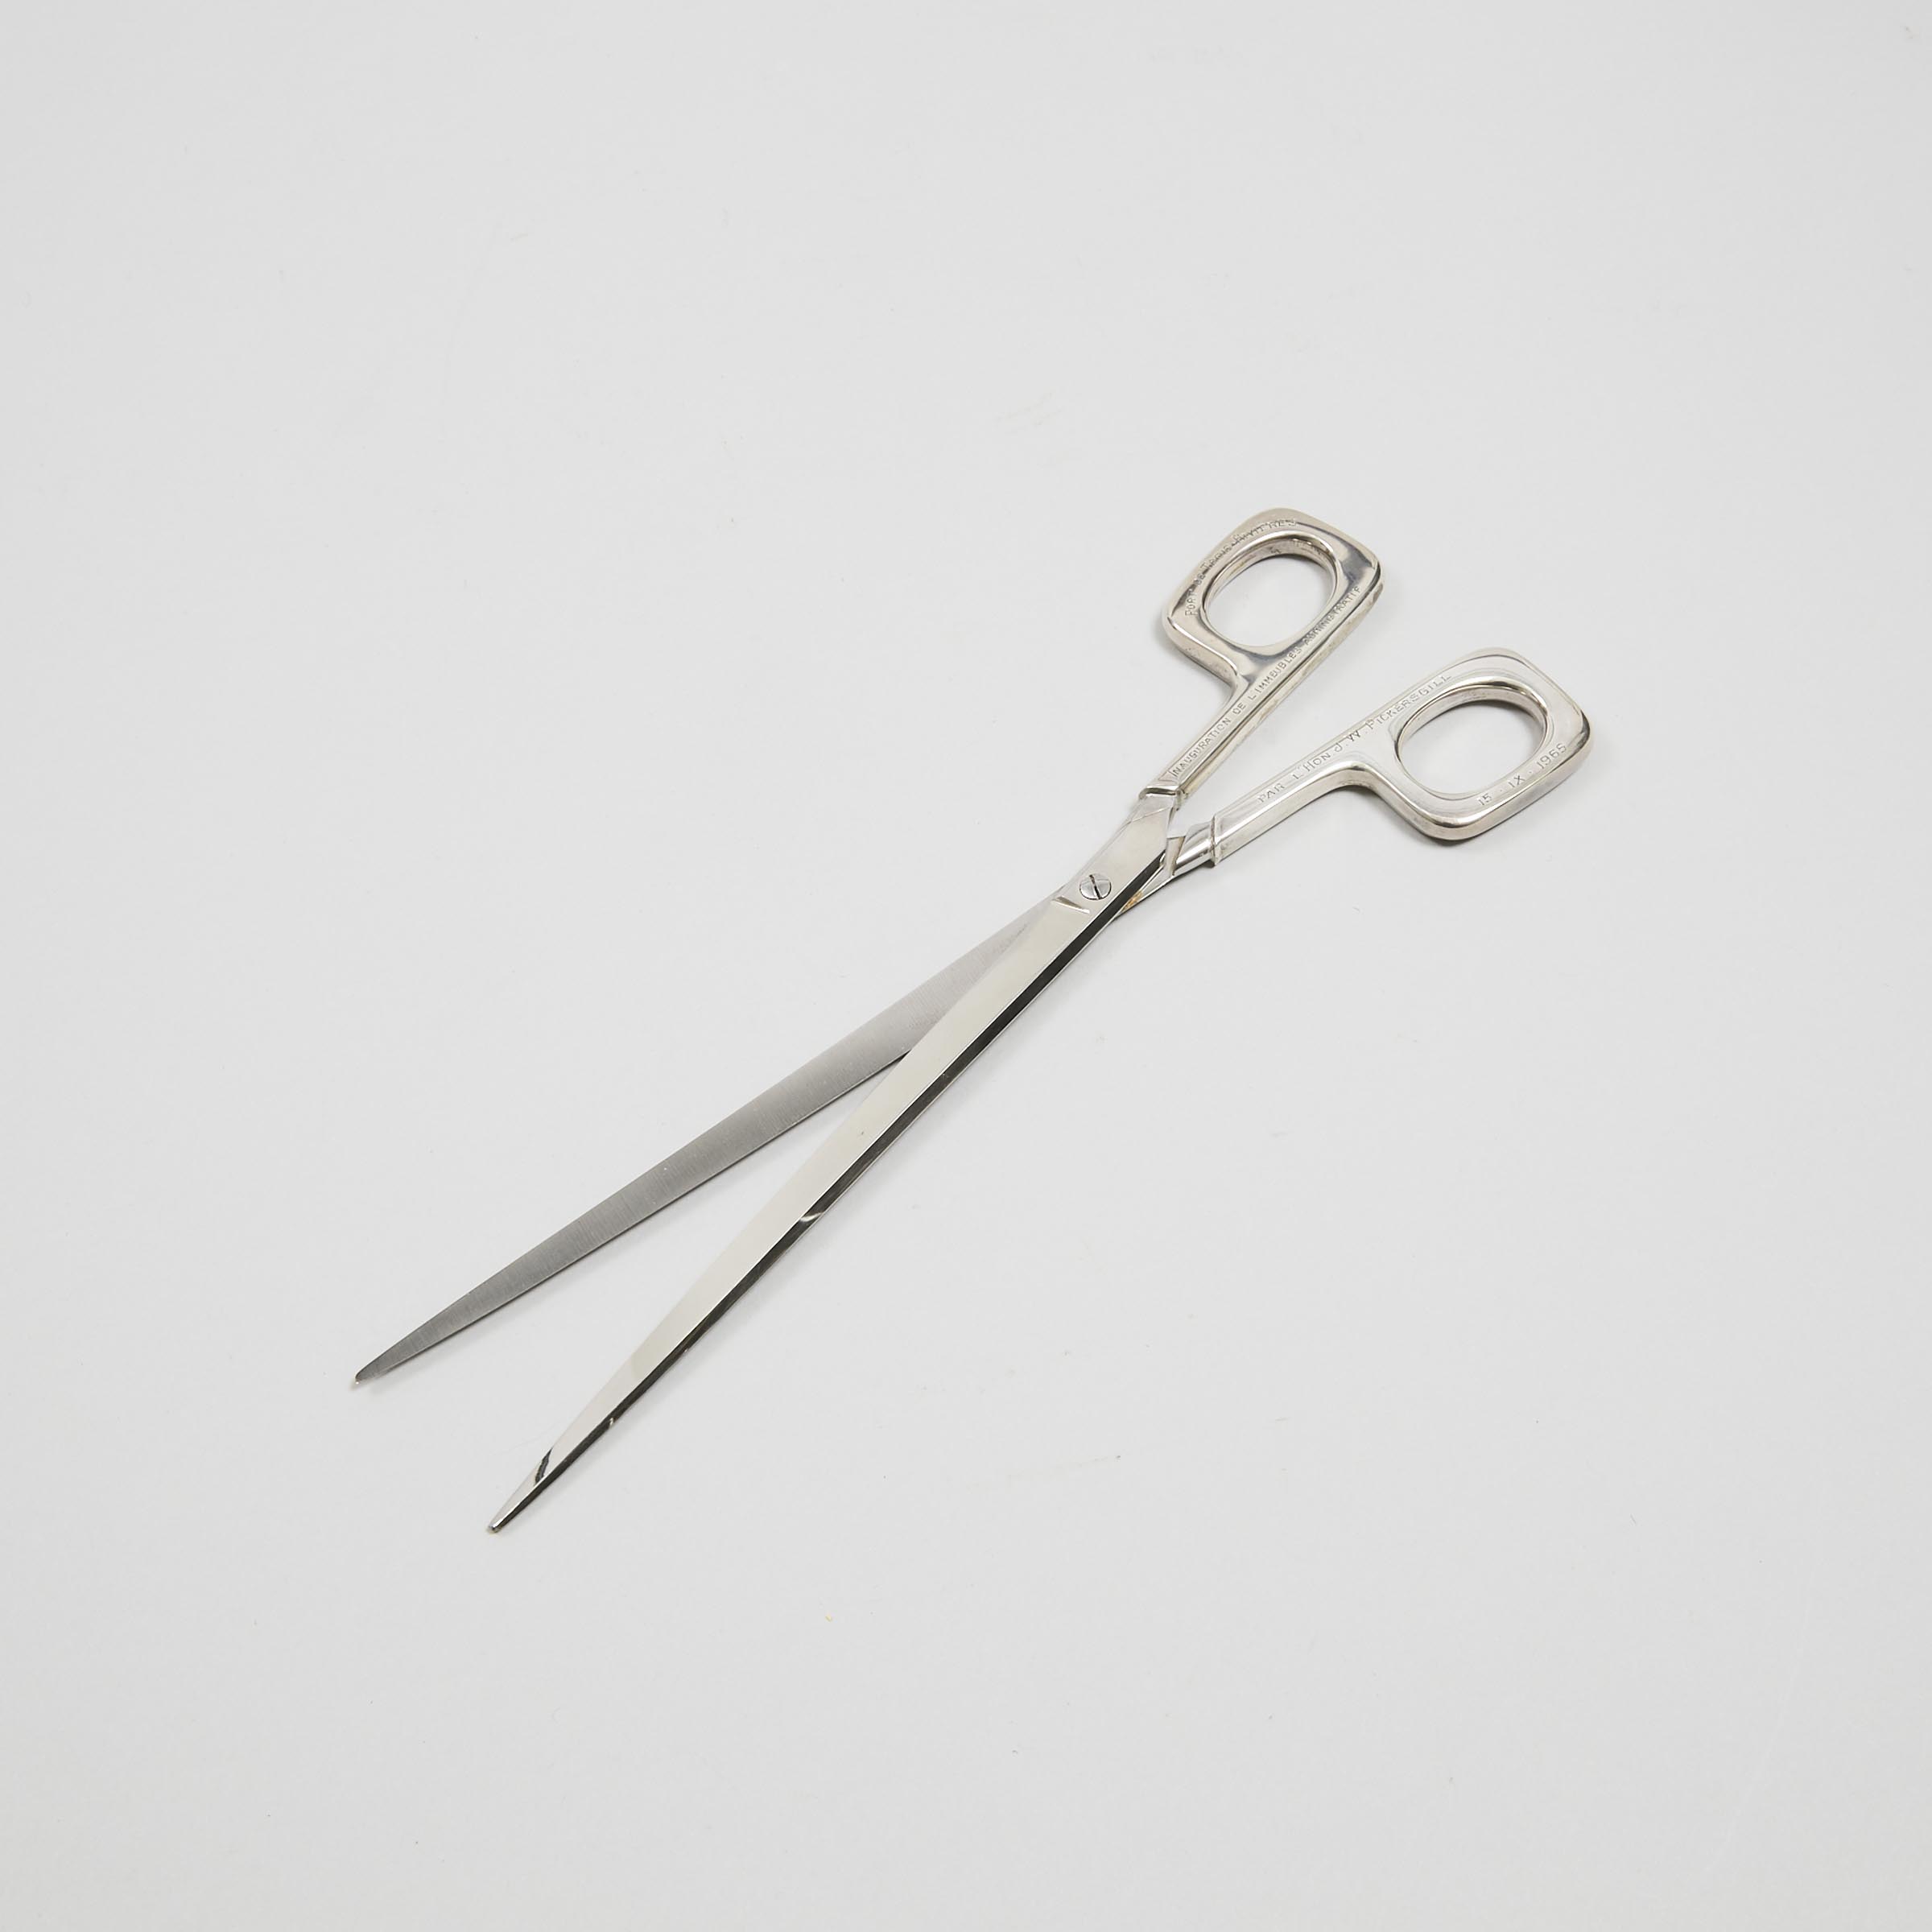 Pair of Canadian Silver Ceremonial Scissors used in a Ribbon Cutting by J. W. 'Jack' Pickersgill, Sept. 15, 1965